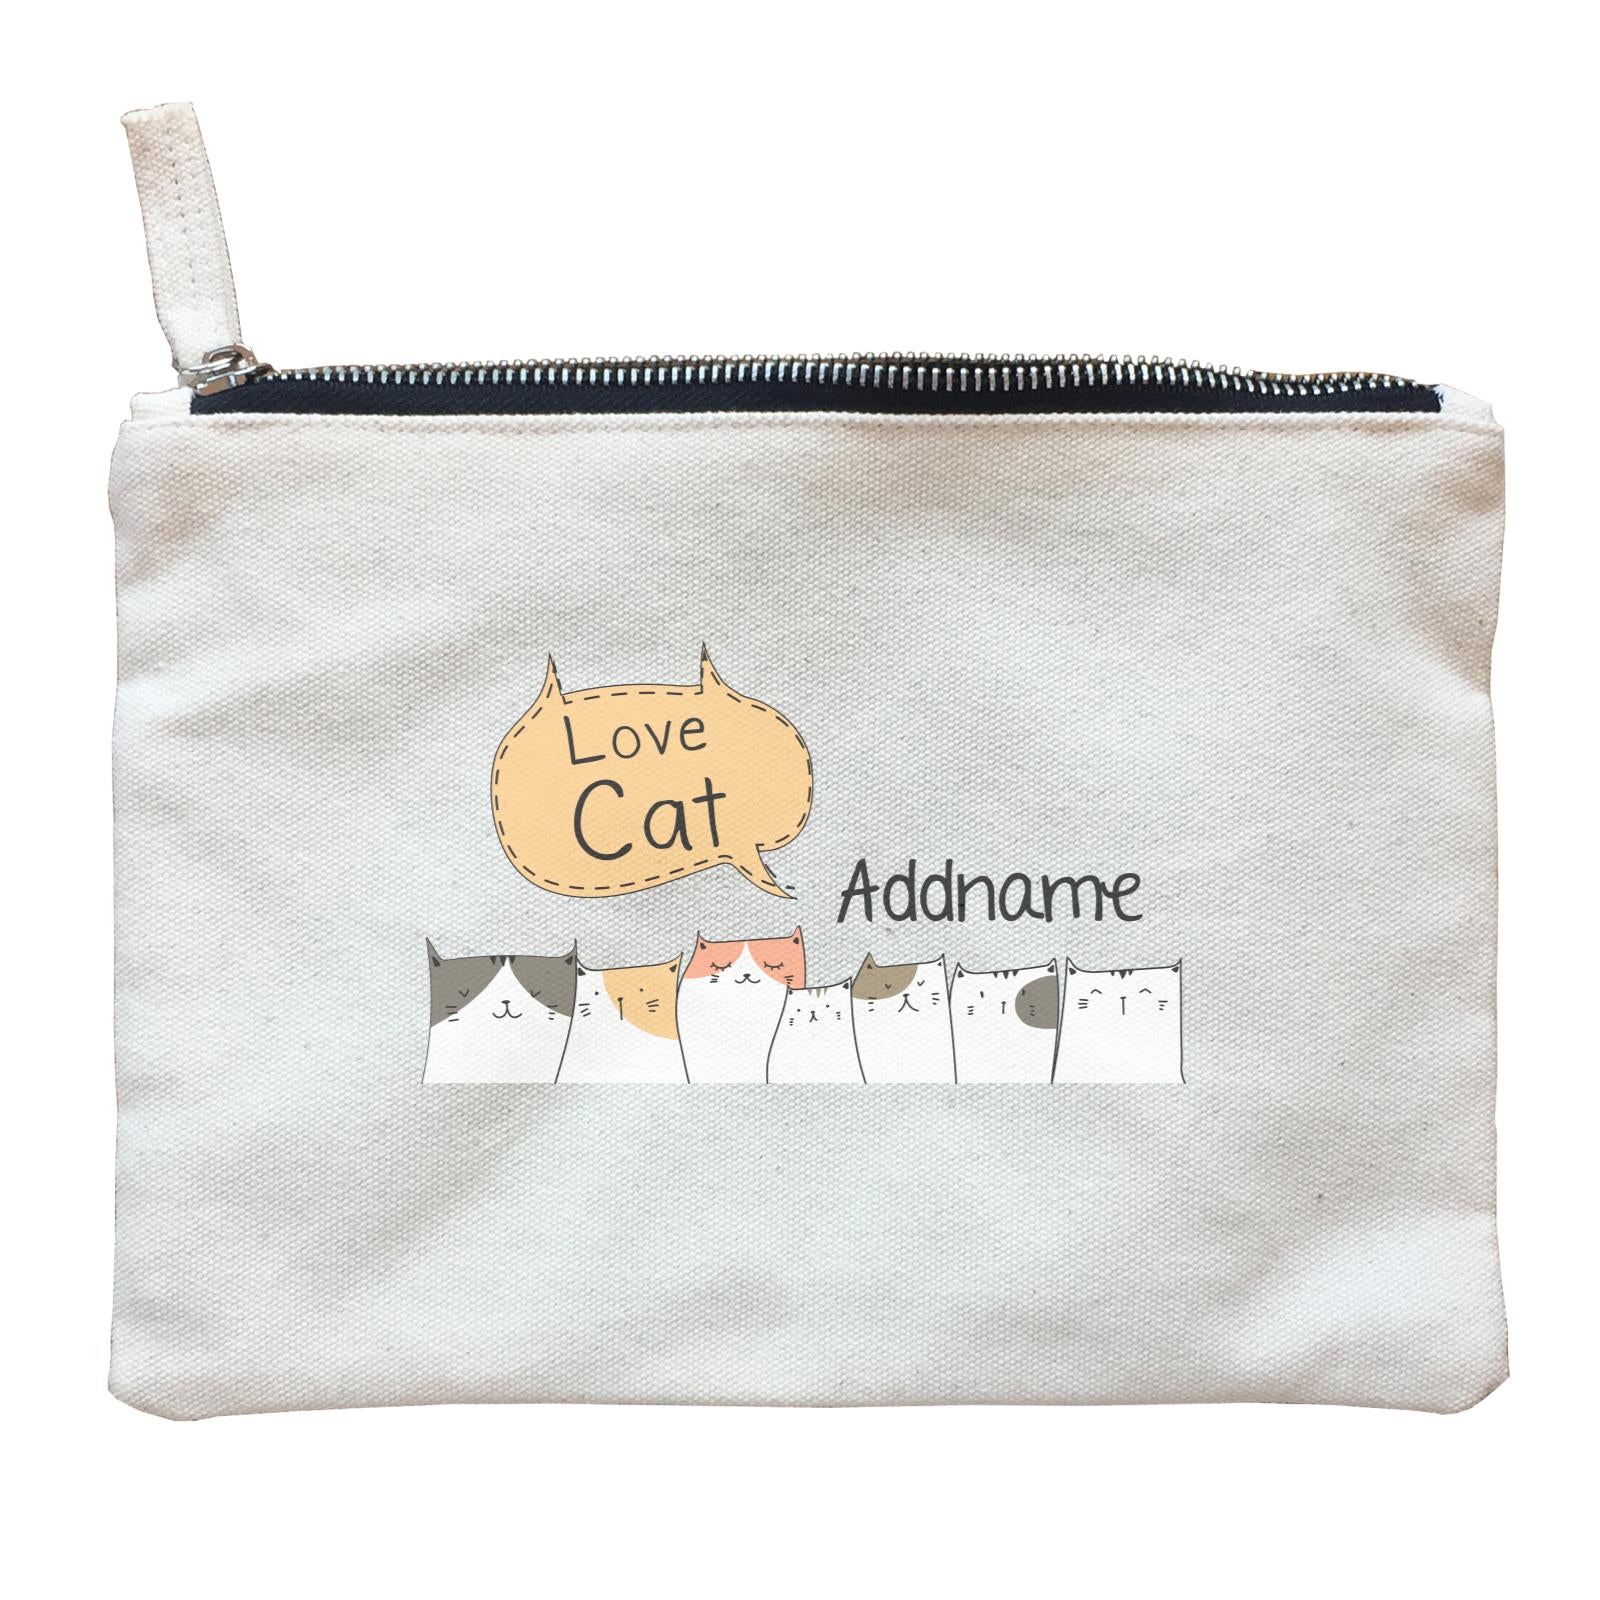 Cute Animals And Friends Series Love Cat Cats Group Addname Zipper Pouch